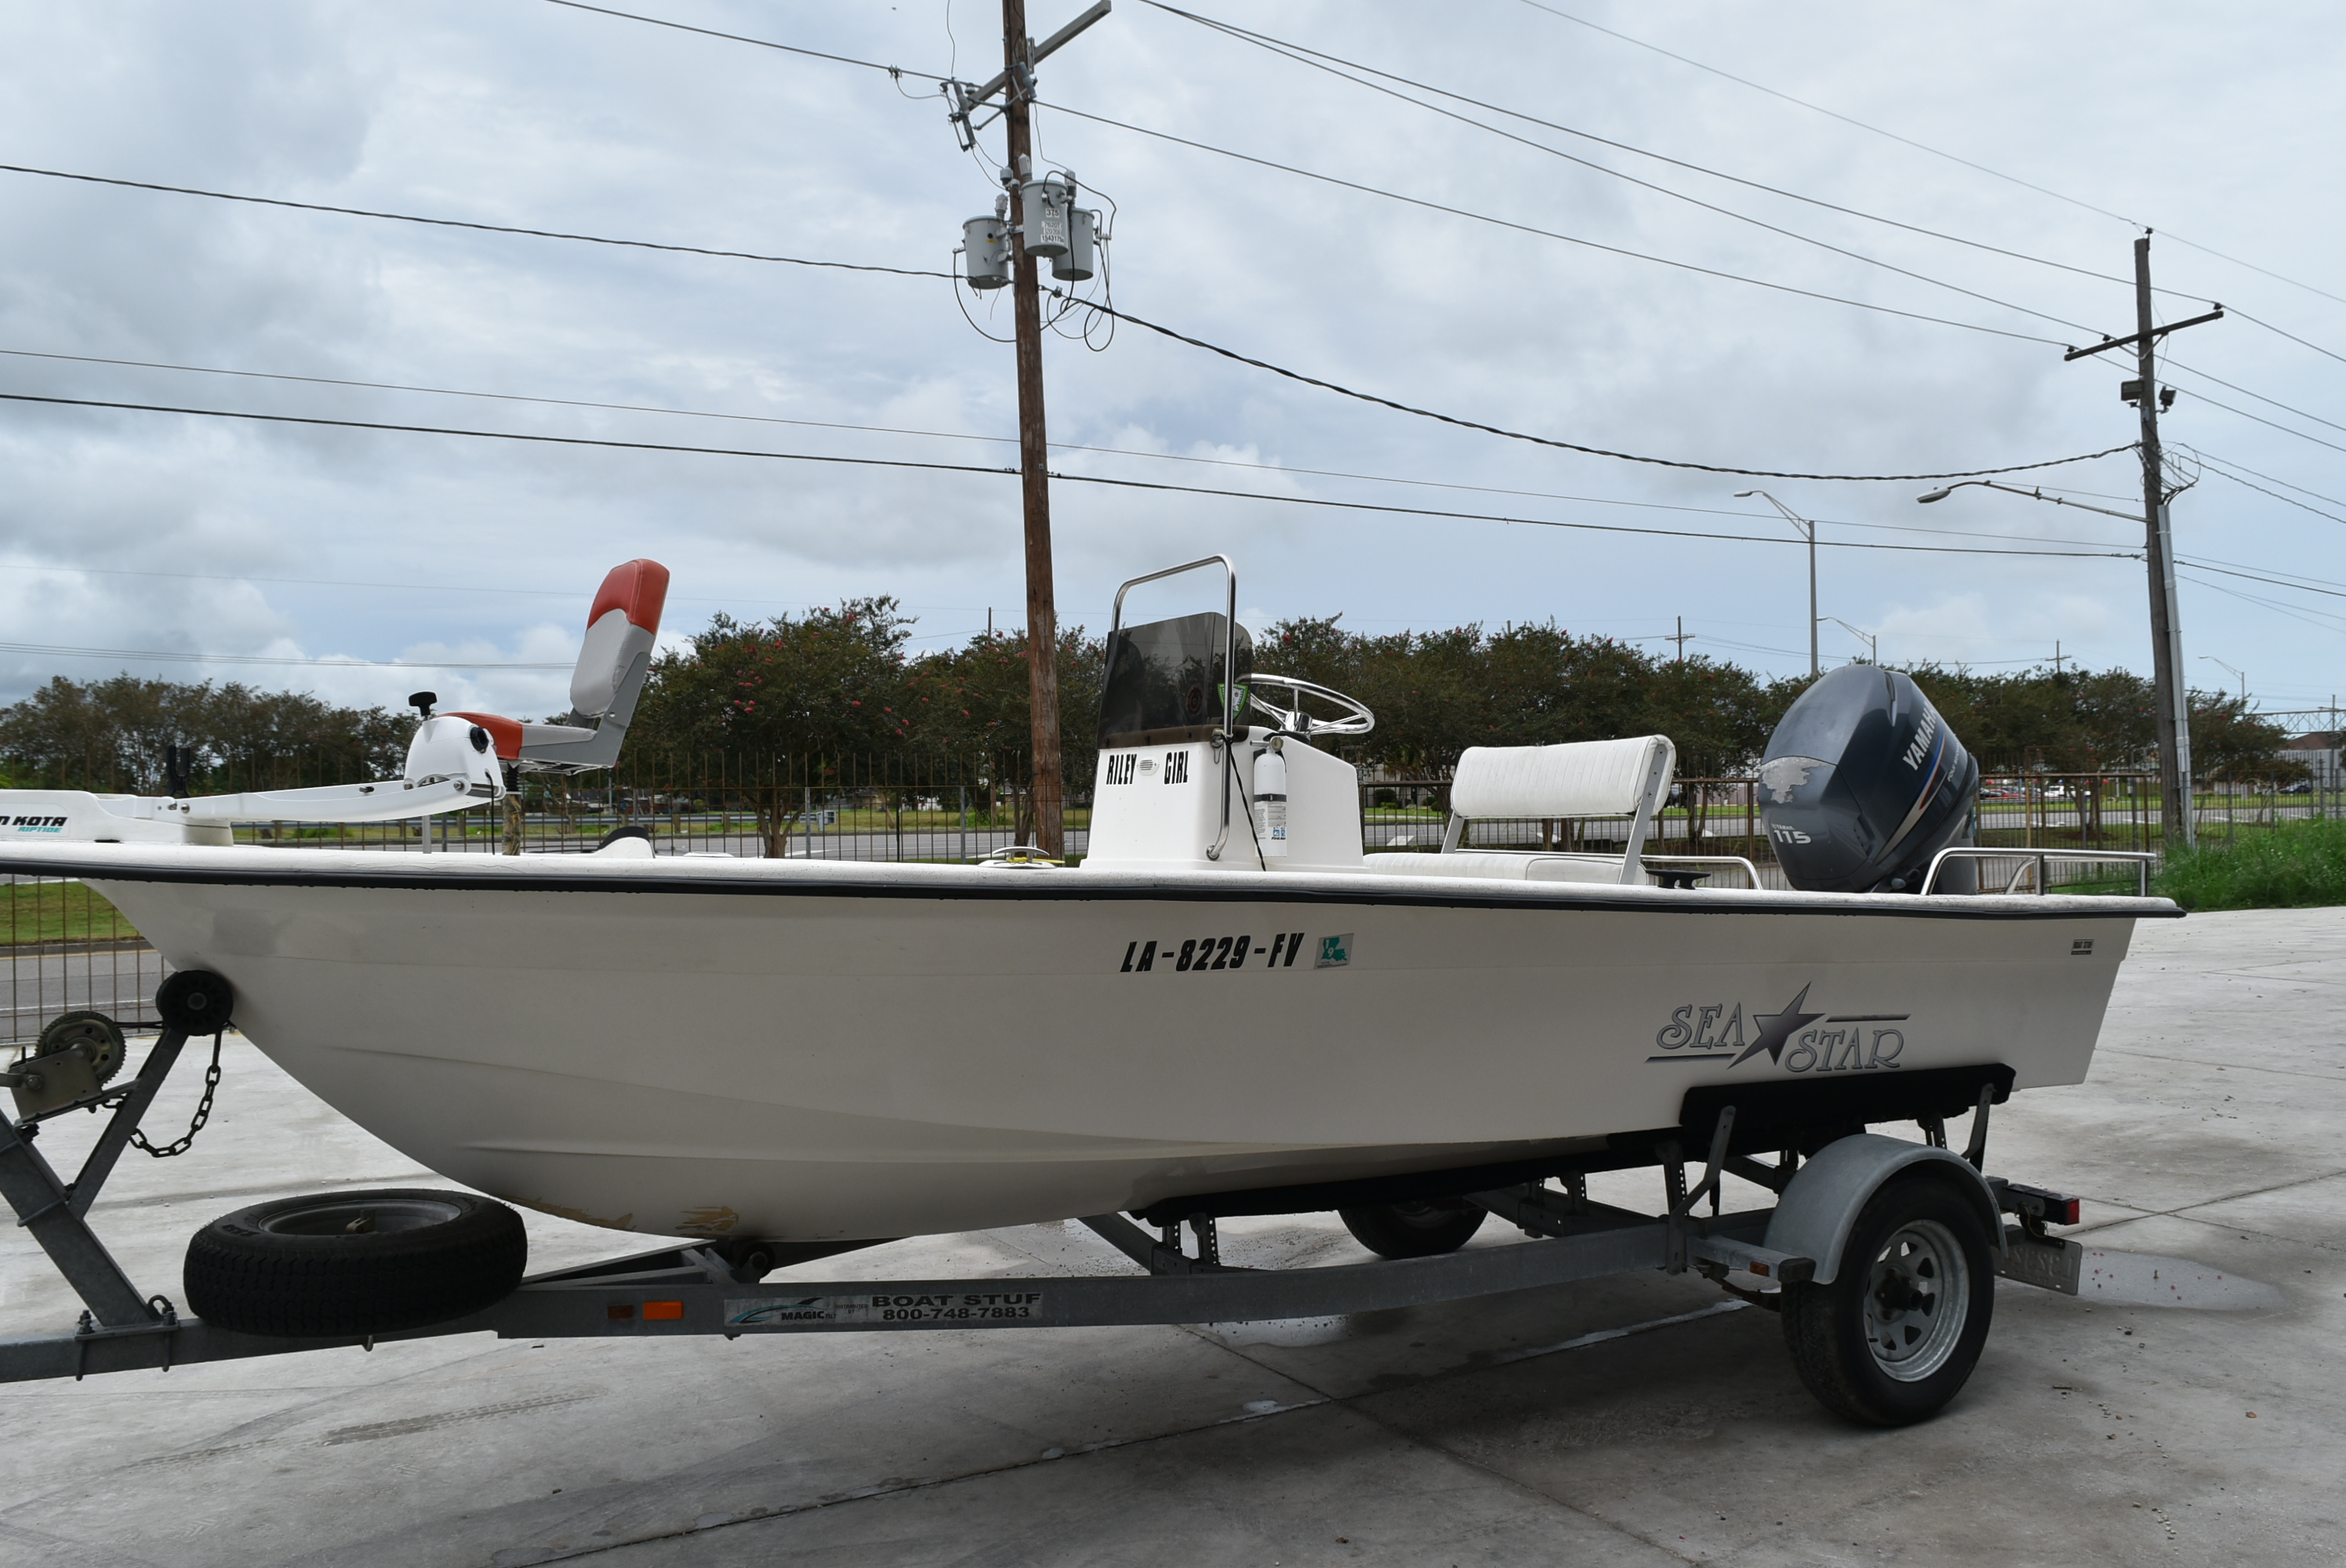 2007 Sea Star boat for sale, model of the boat is 1900 & Image # 3 of 4